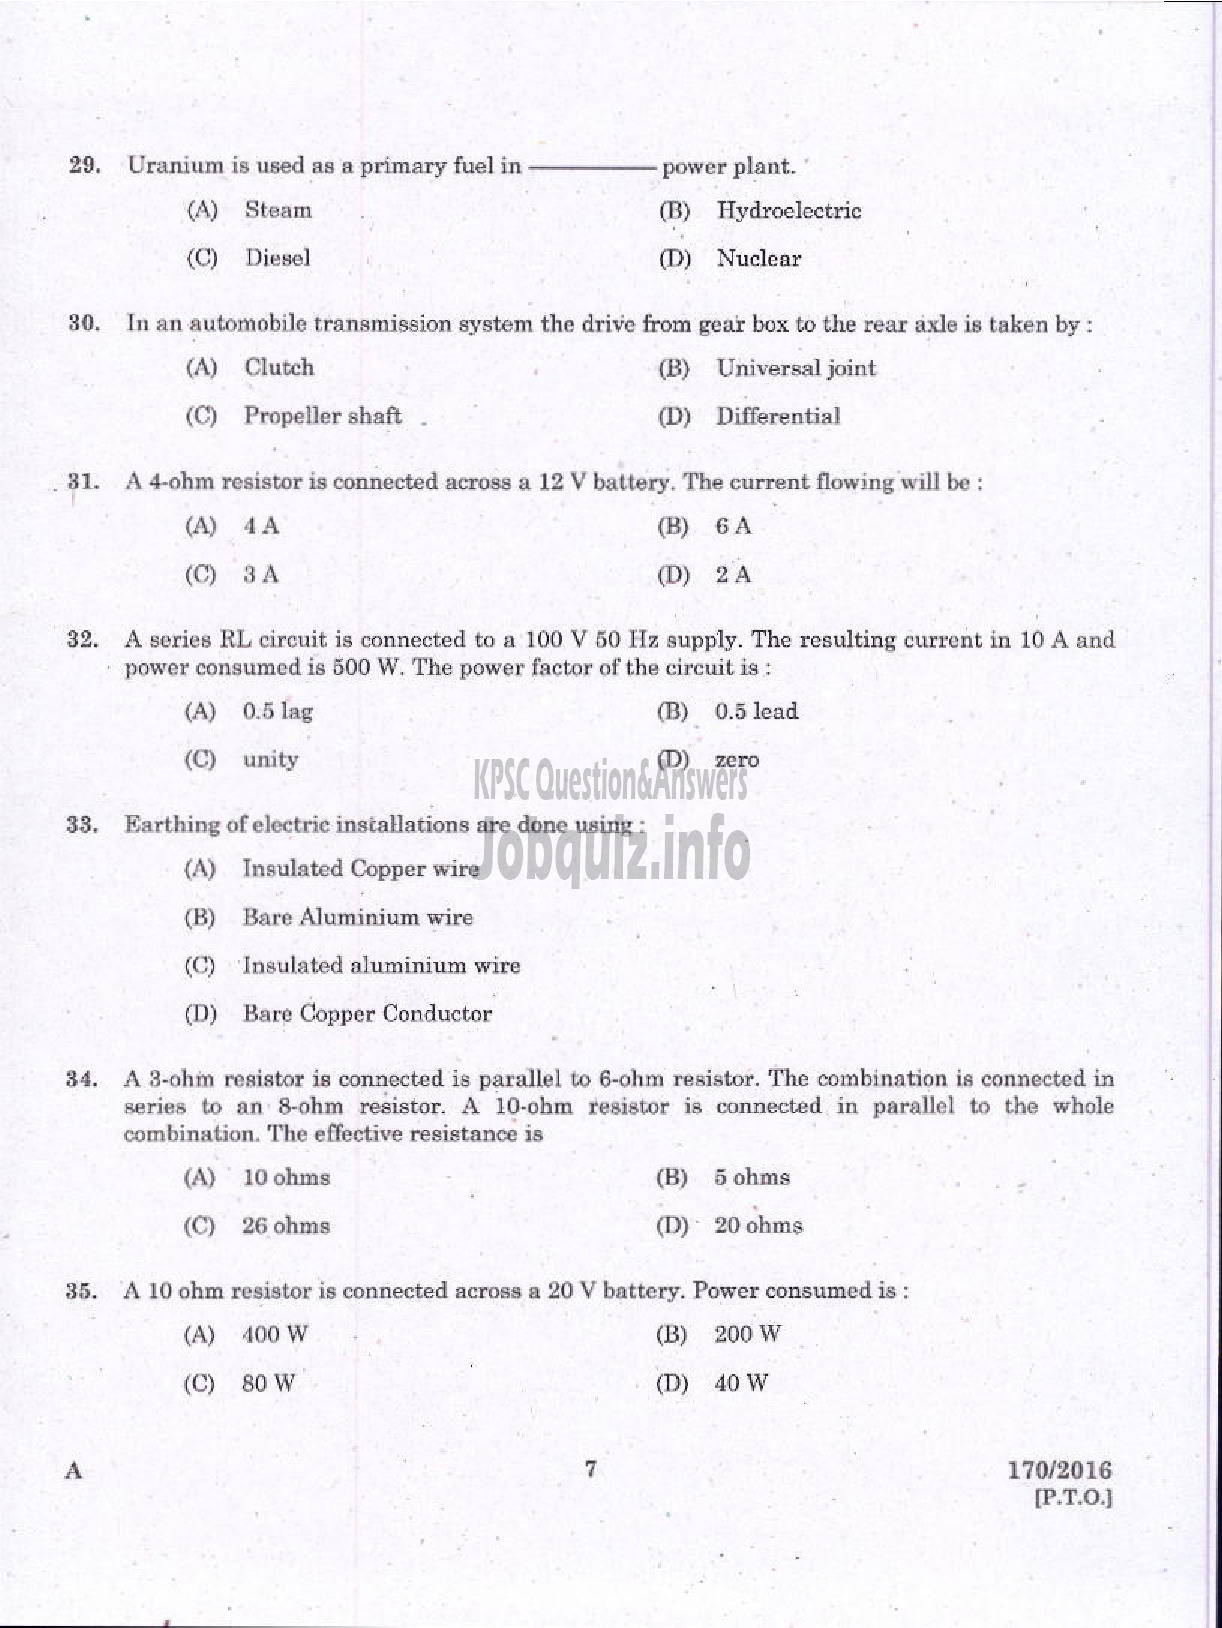 Kerala PSC Question Paper - LECTURER IN CIVIL ENGINEERING GOVT POLYTECHNICS TECHNICAL EDUCATION-5